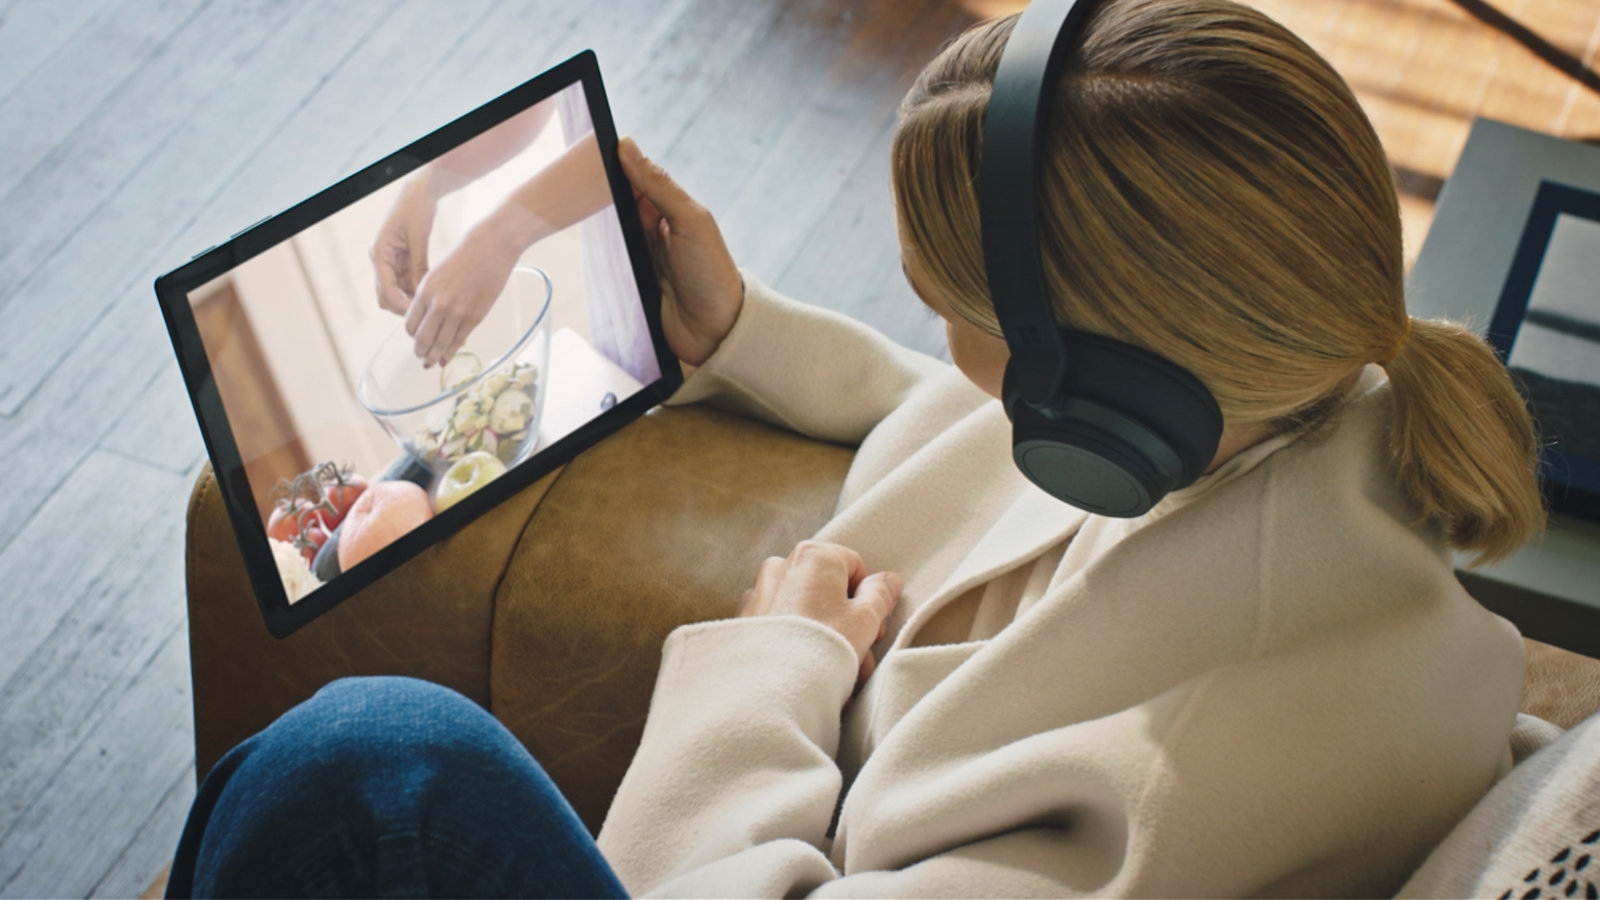 Woman holding a Surface Pro 7, watching a cooking video with black Surface Headphones on